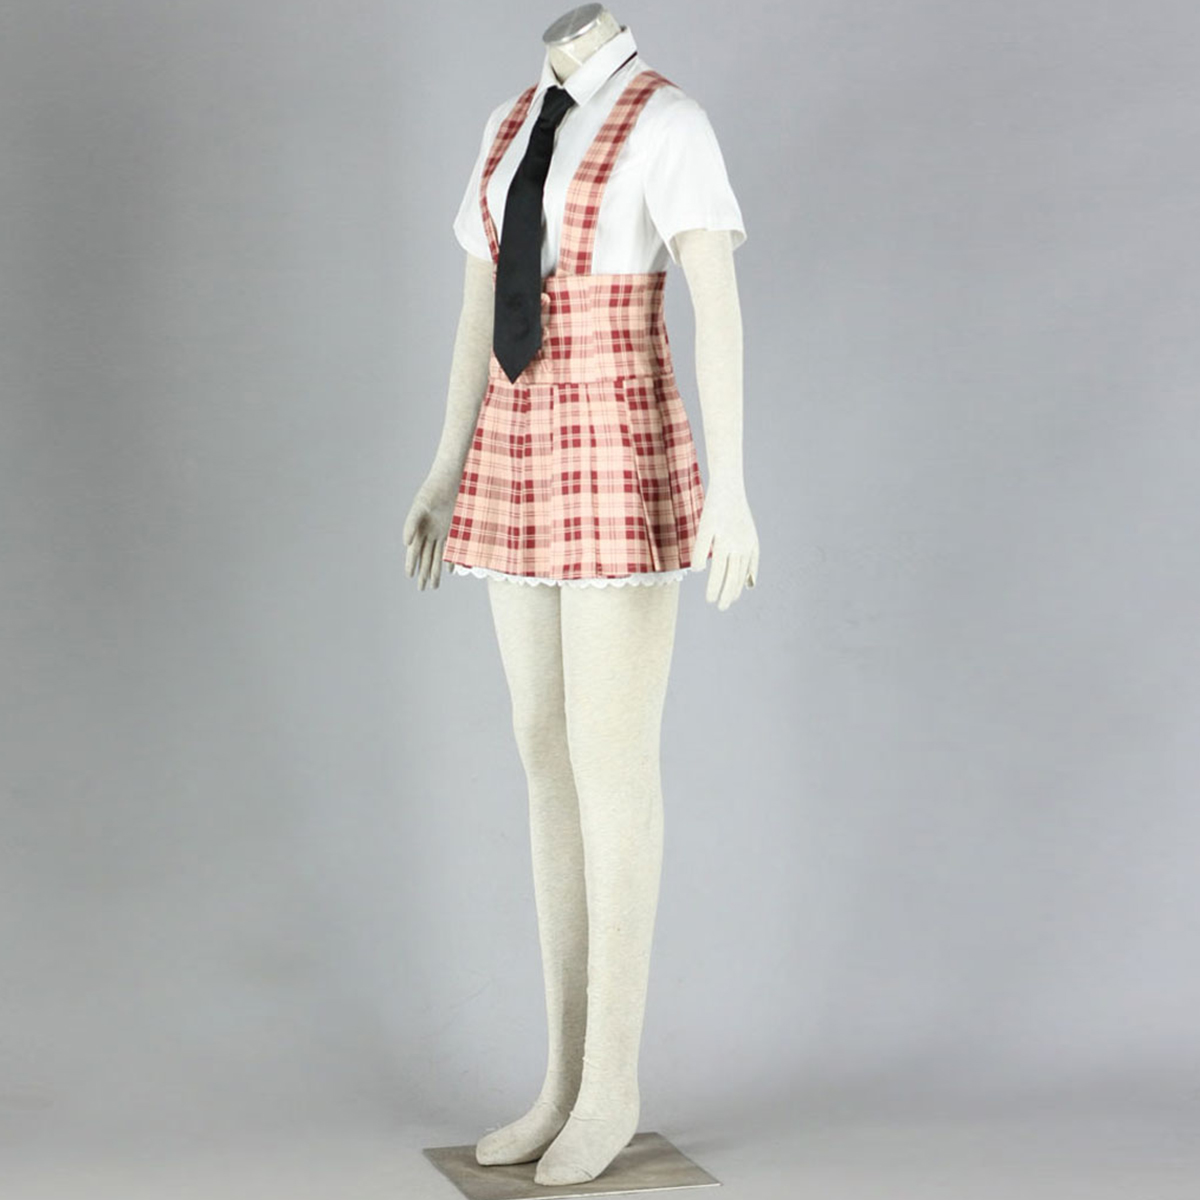 Axis Powers Hetalia Summer Female Uniform 2 Anime Cosplay Costumes Outfit